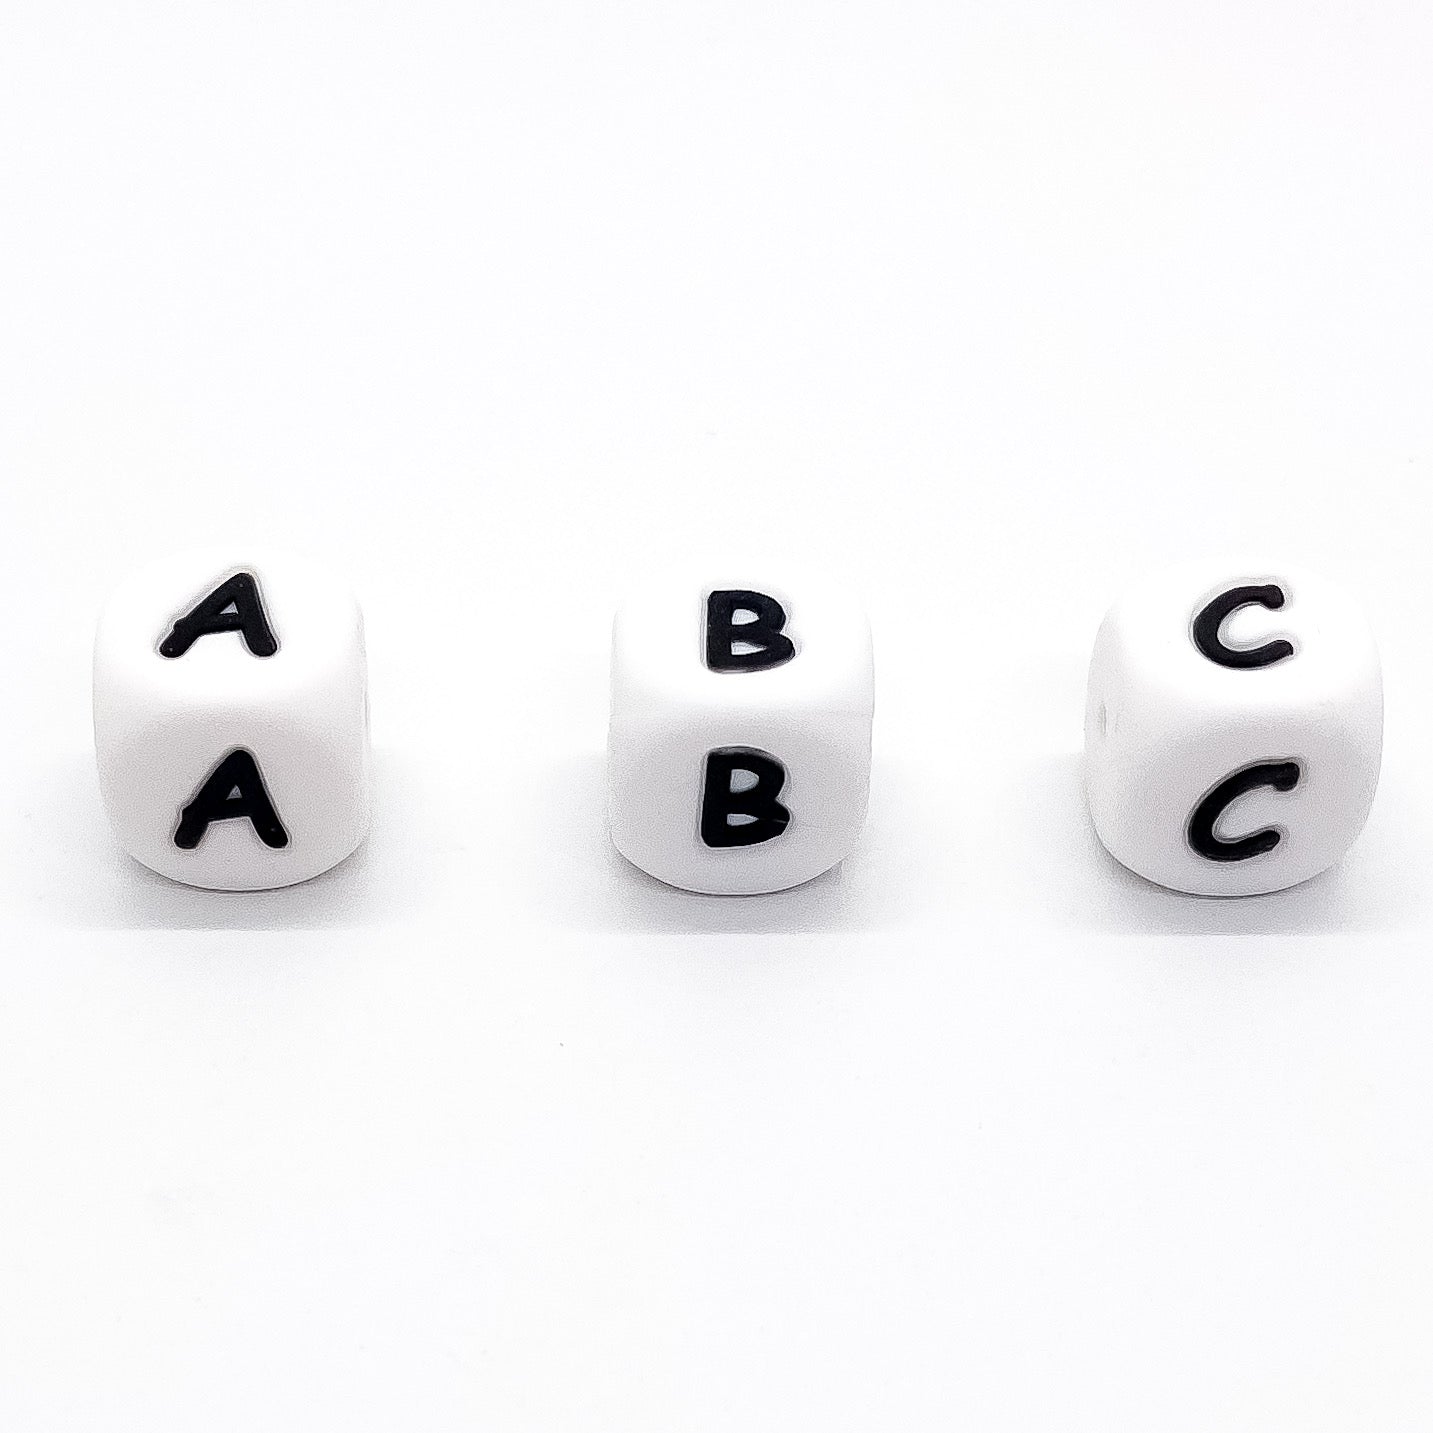 12mm Silicone Letters Beads, English Alphabet Letter Beads